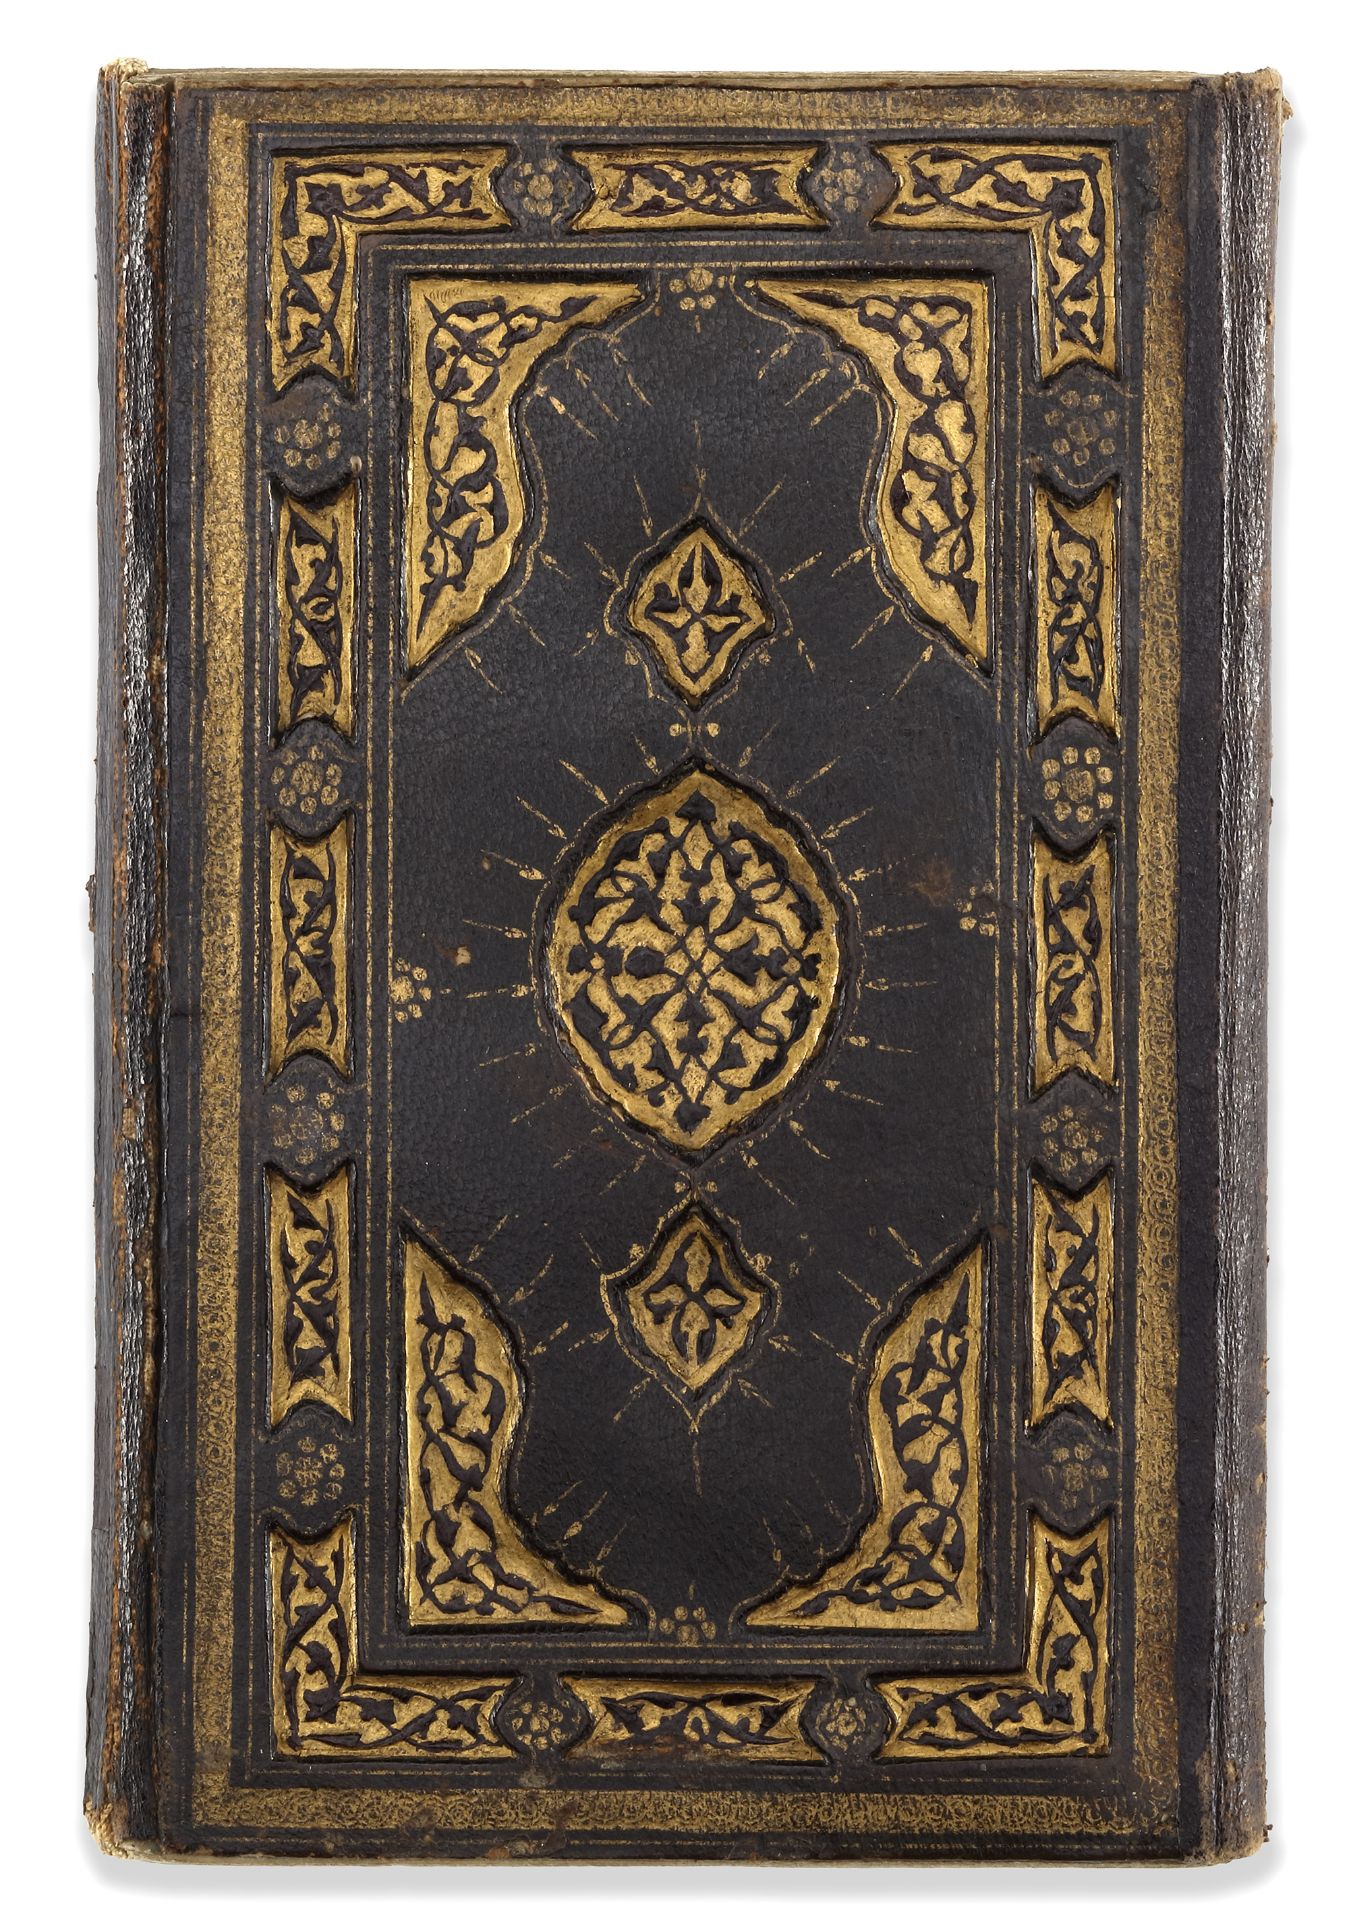 AN OTTOMAN QURAN SIGNED BY SULEIMAN AL-QAE'I AND DATED 1191 AH/1777 AD - Image 6 of 6